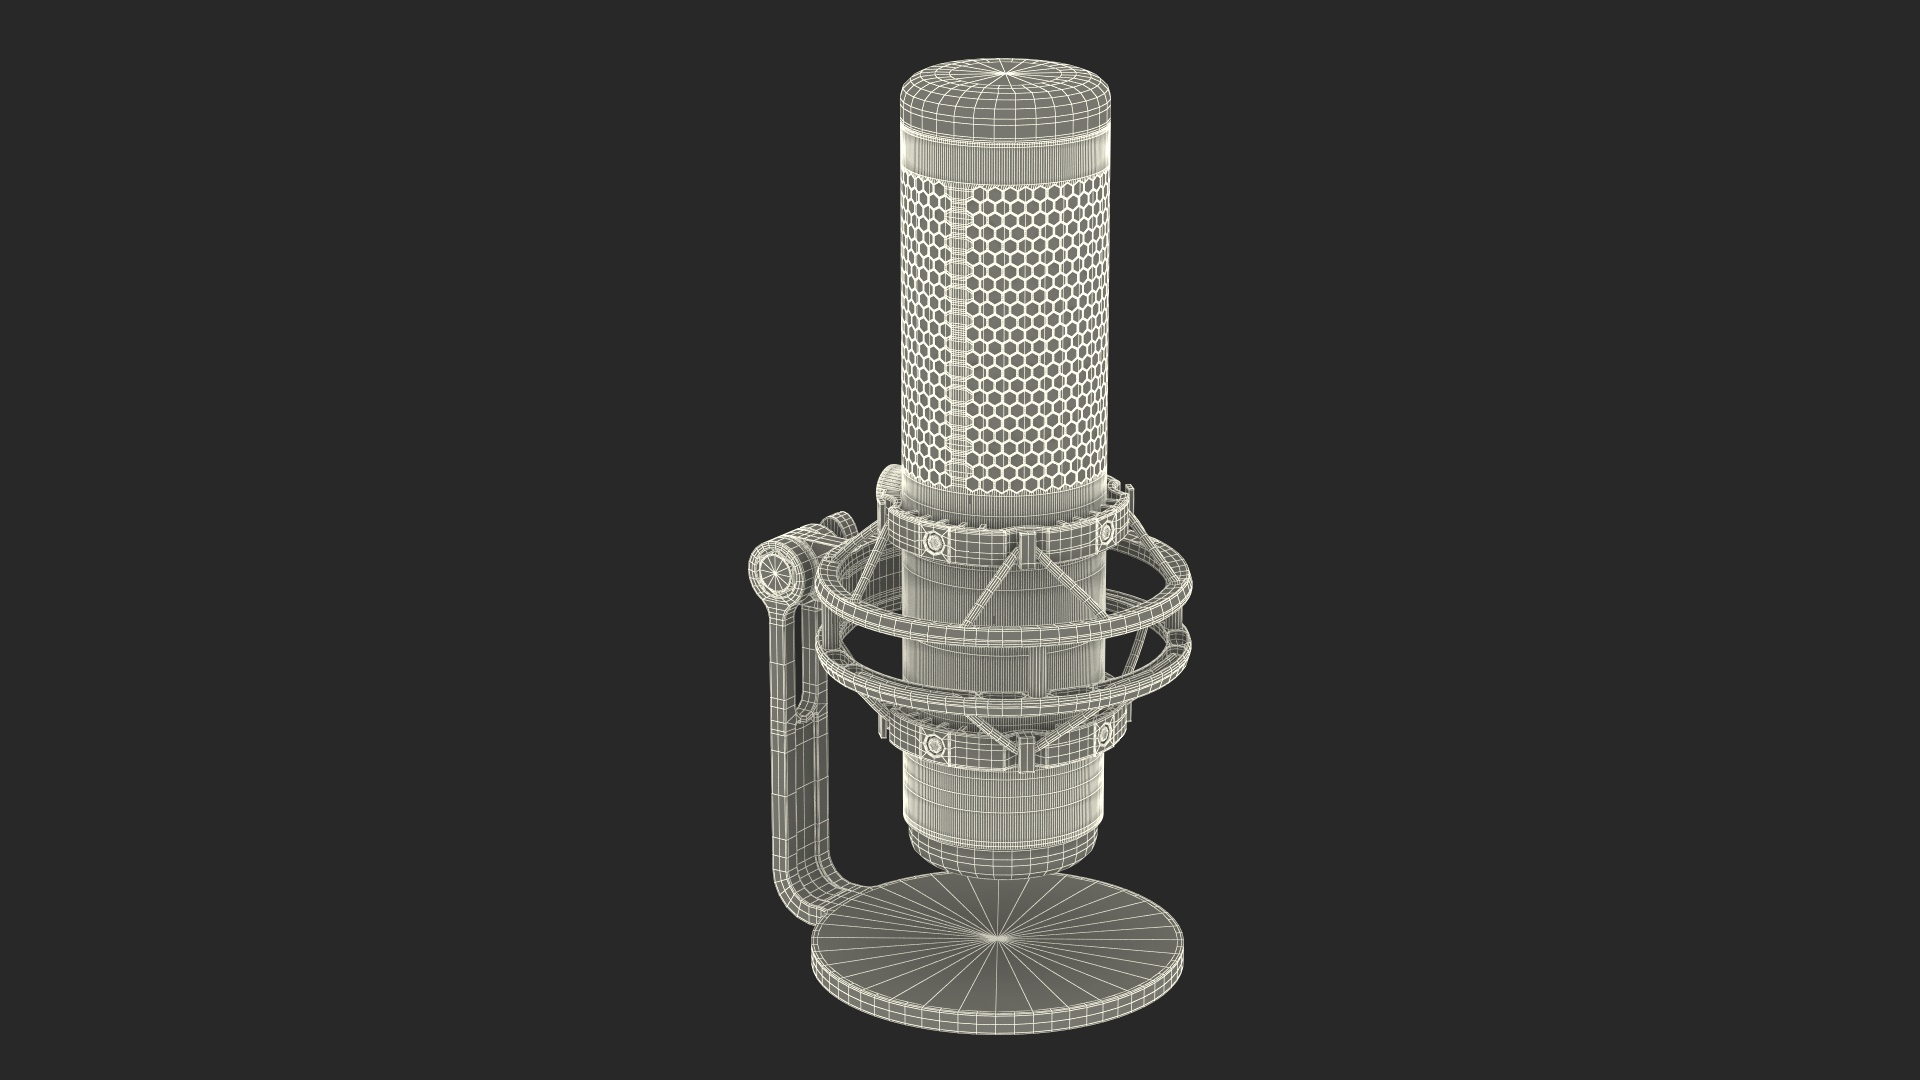 Microphone for computer HyperX QuadCast S 3D Model in Computer